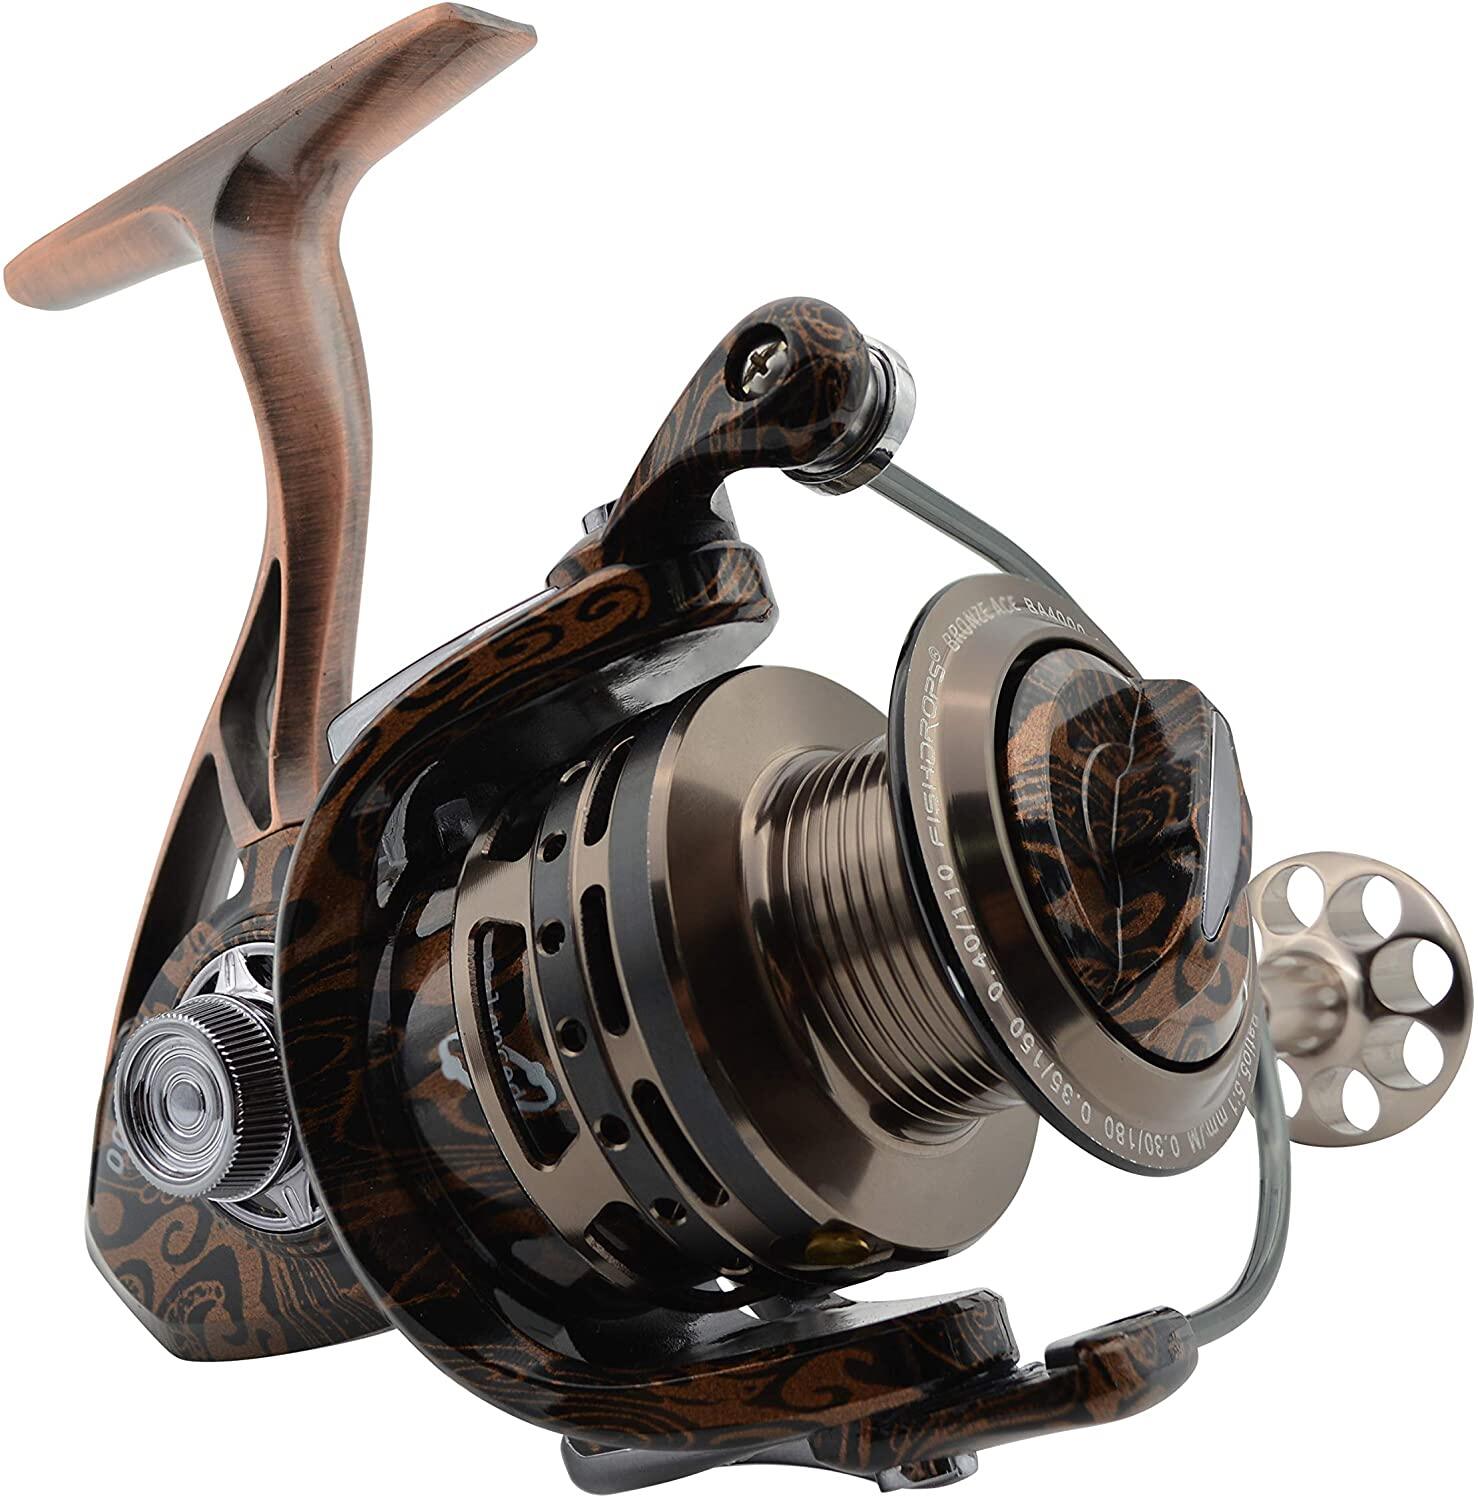  Fishdrops Surf Spinning Reel, Size 10000 12000